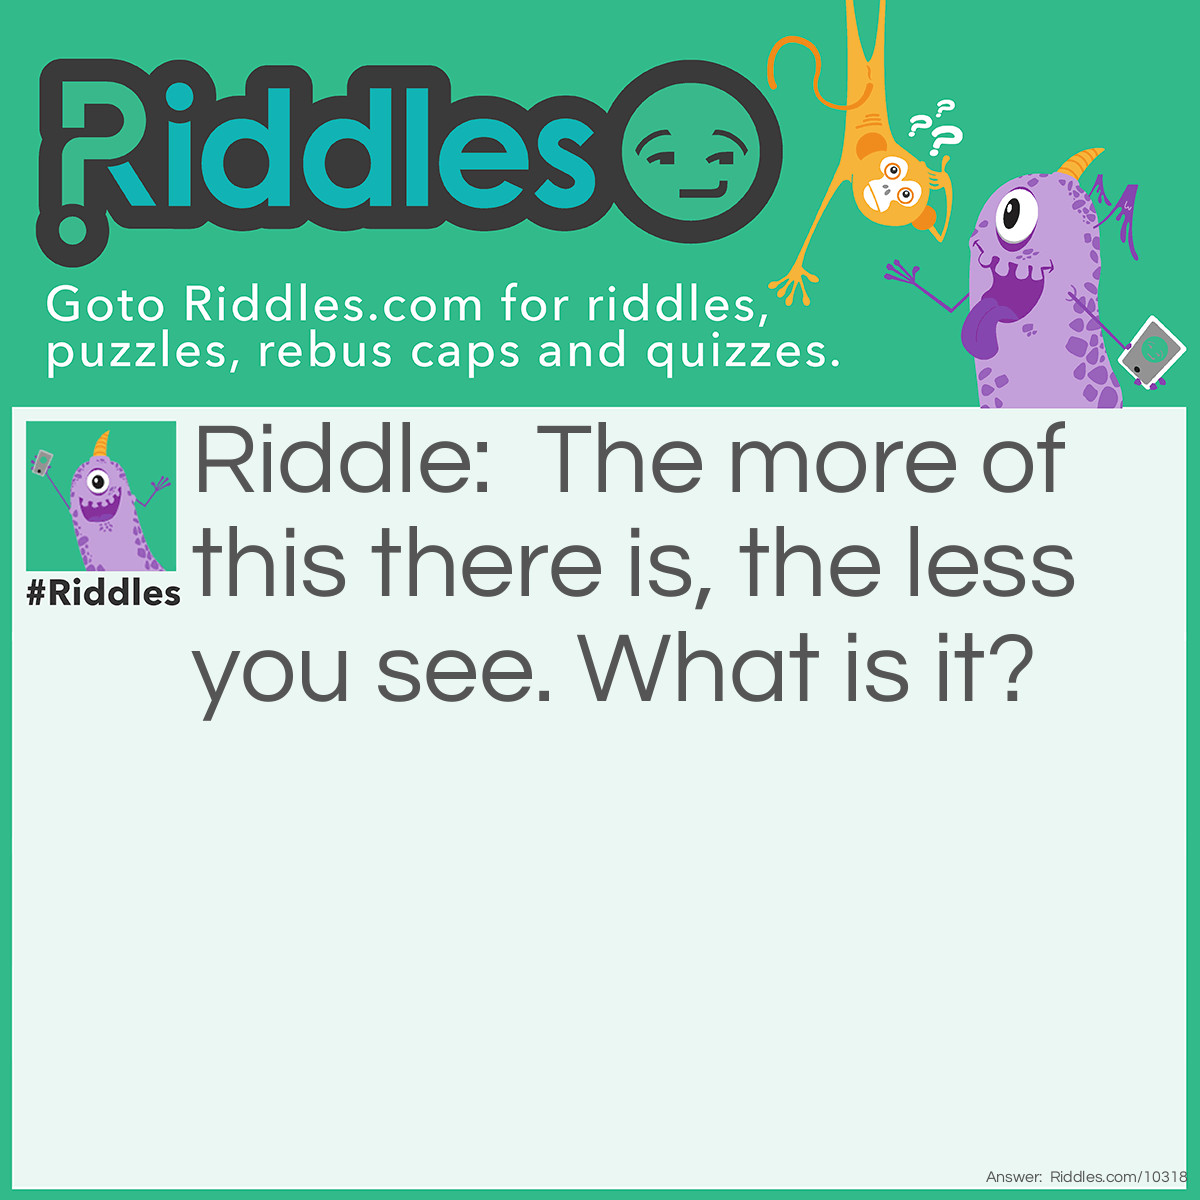 Riddle: The more of this there is, the less you see. What is it? Answer: Darkness.